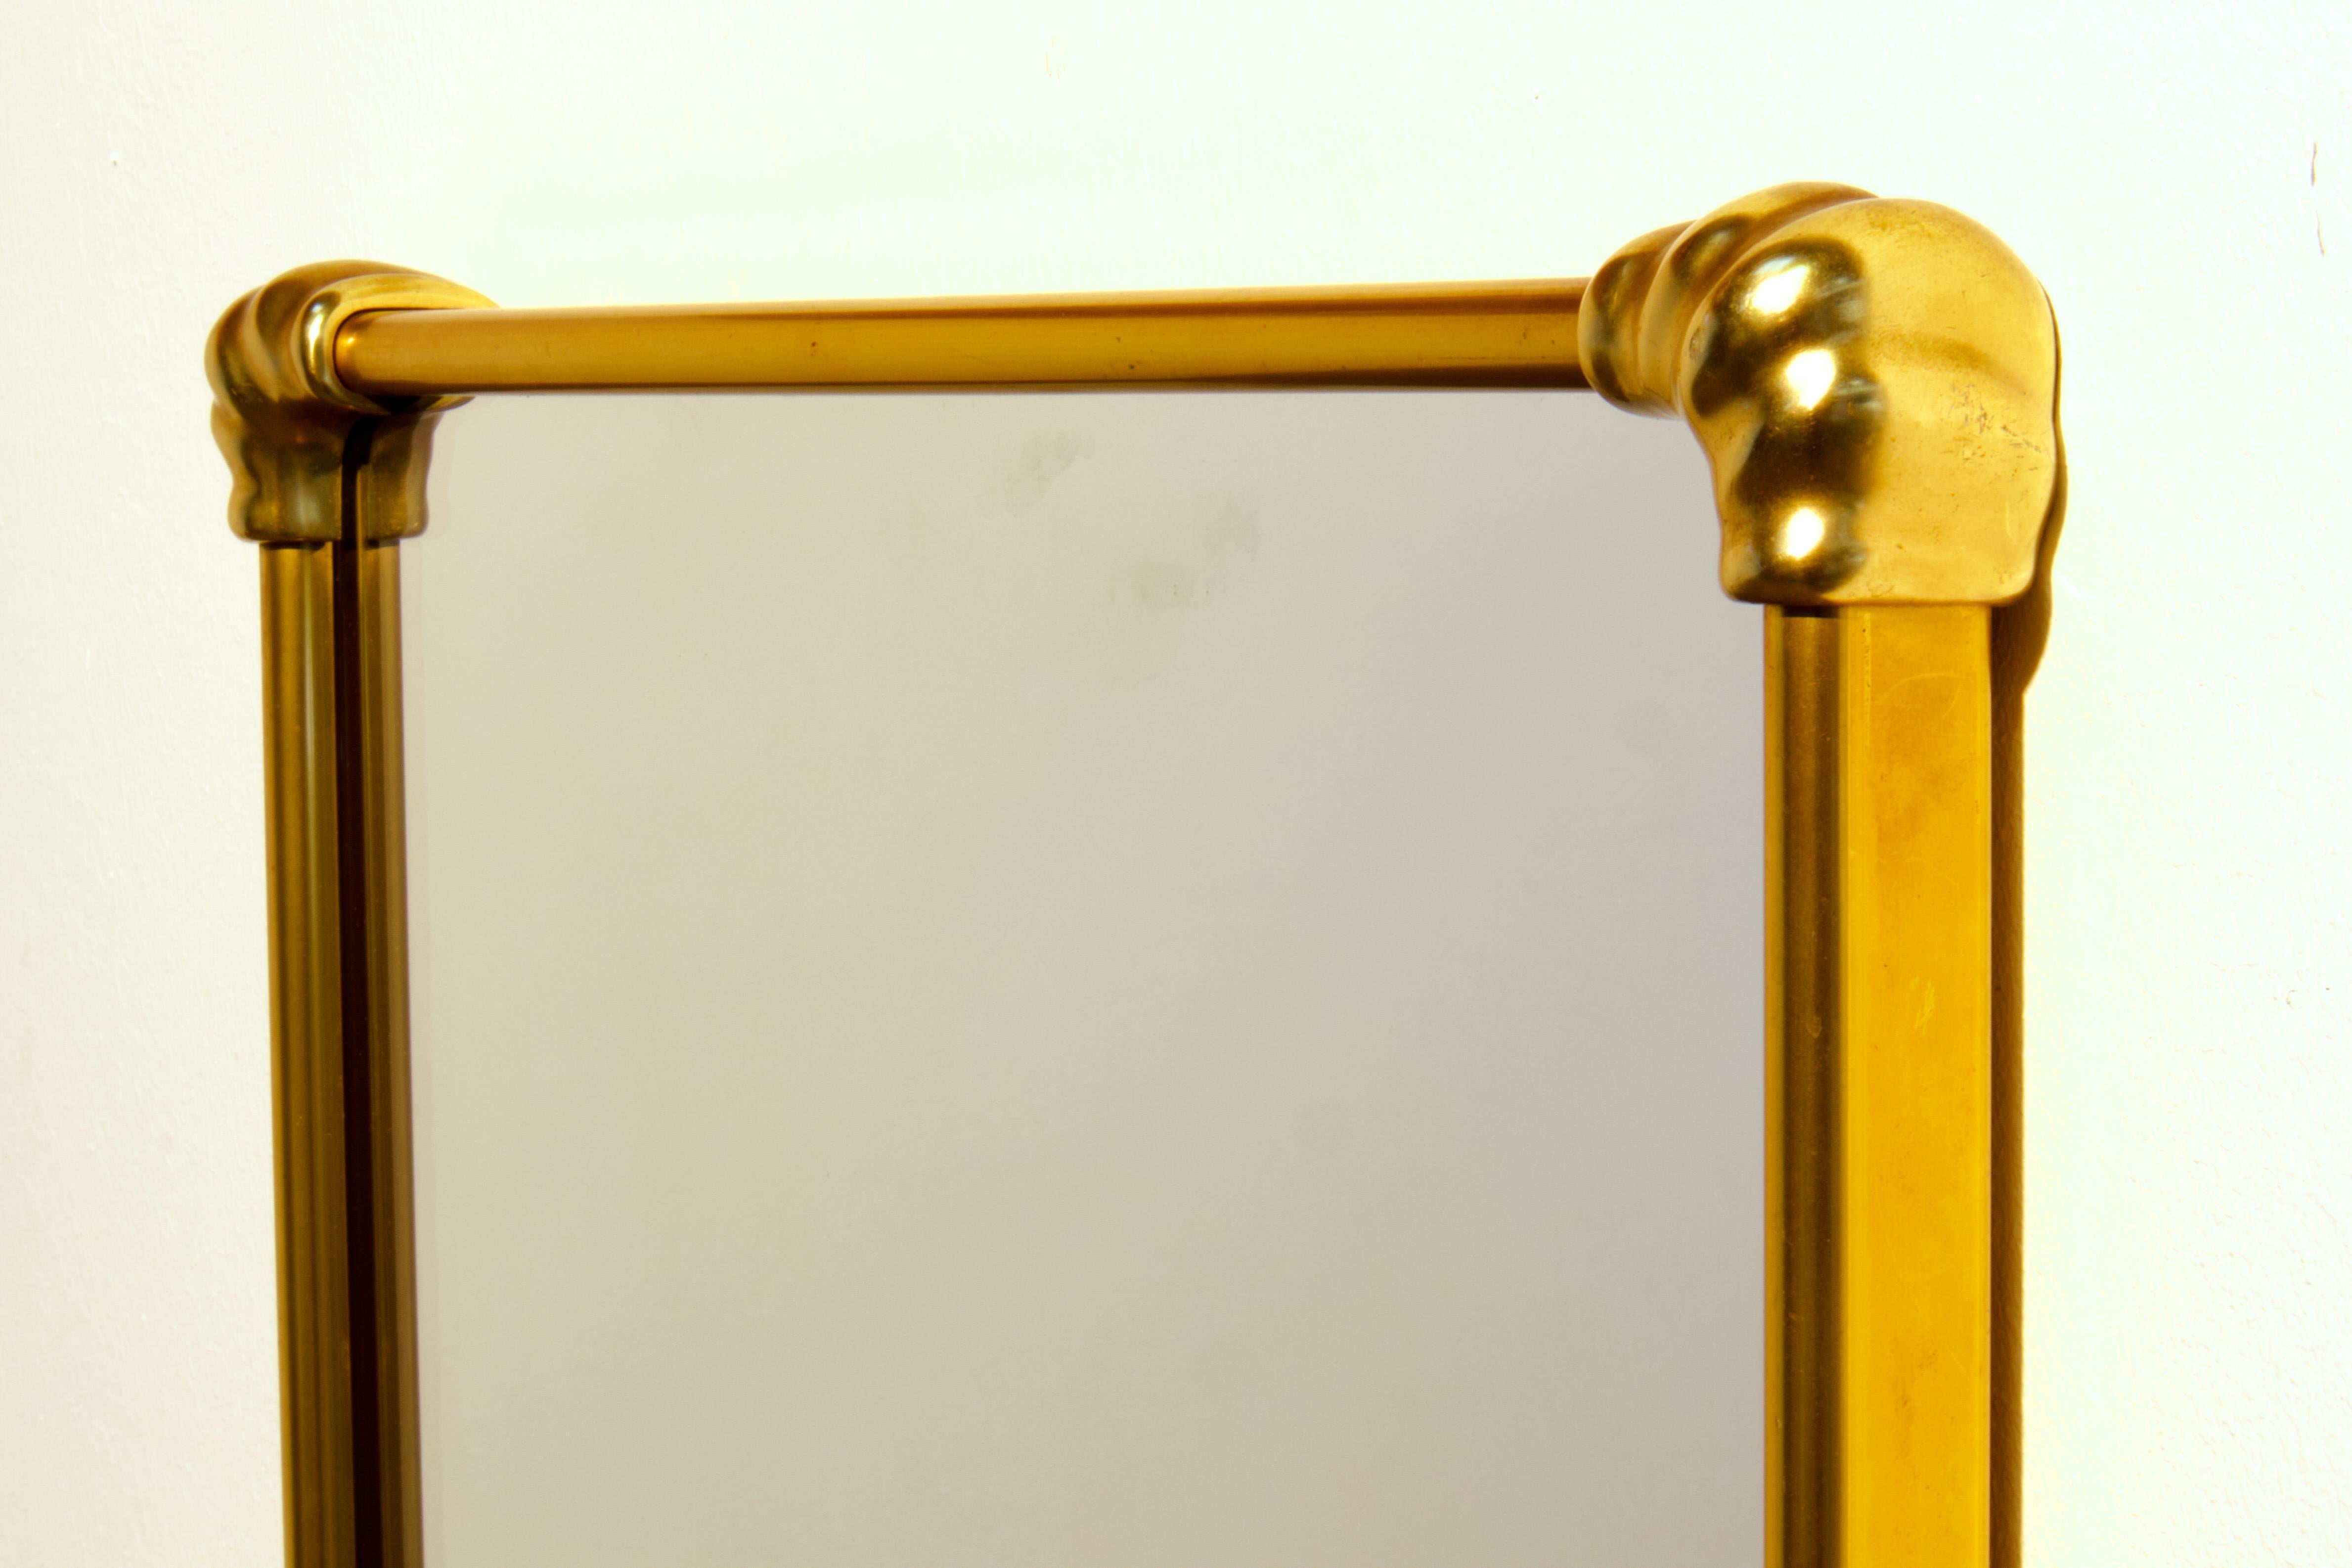 1950s Gio Ponti Era Mid-Century Modern Rectangular Italian Brass Wall Mirror In Good Condition For Sale In Grand Cayman, KY